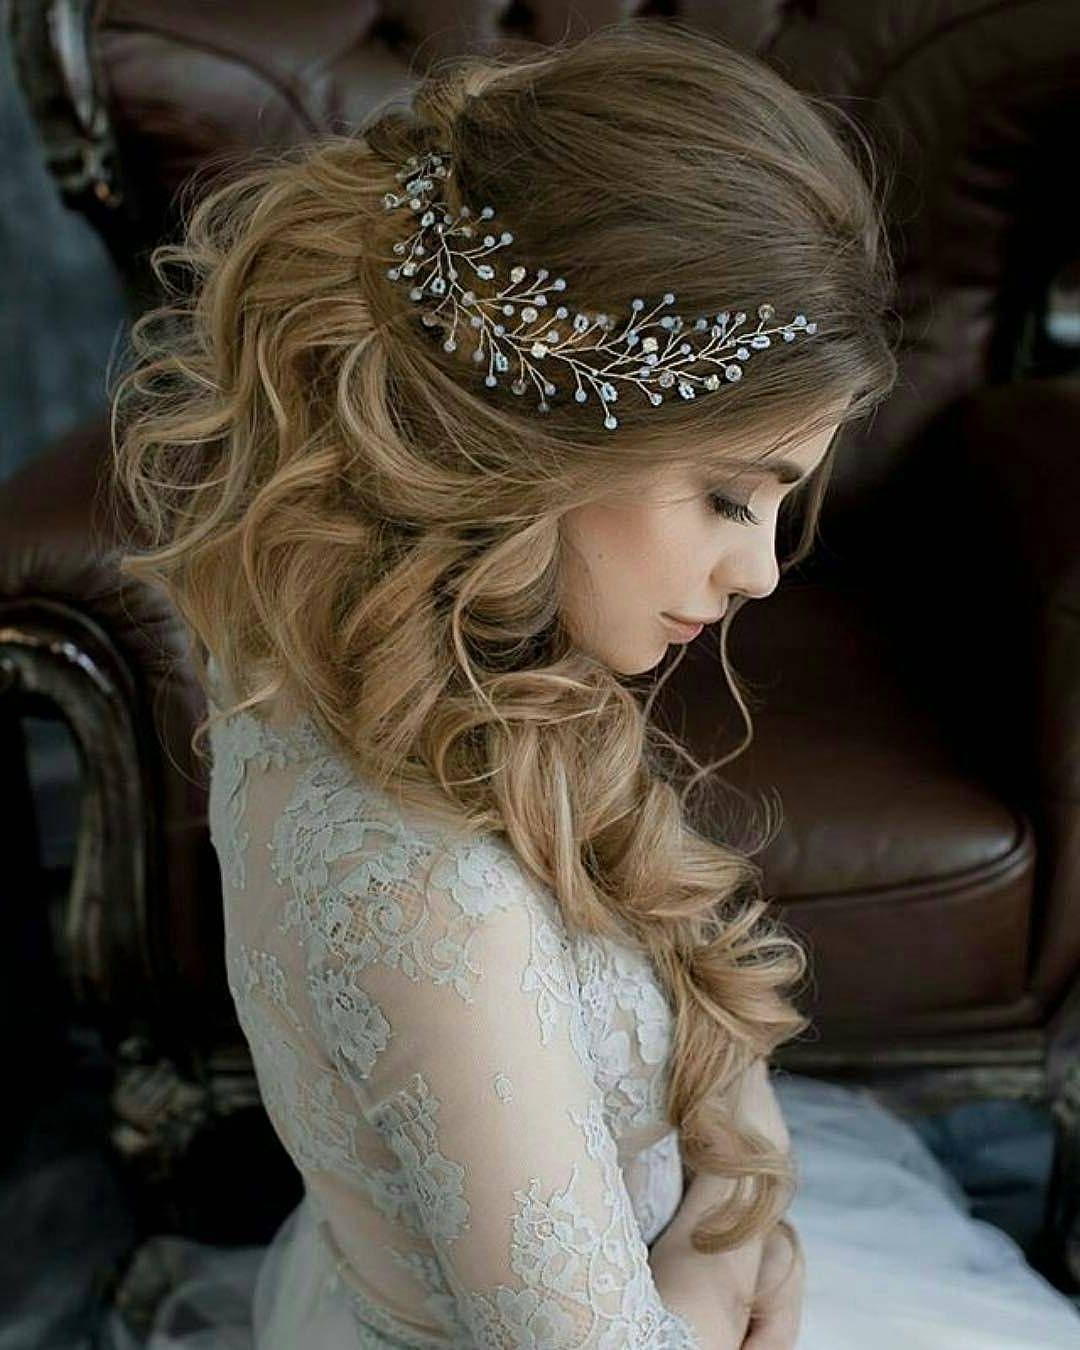 Well Liked Loose Curly Half Updo Wedding Hairstyles With Bouffant Throughout 10 Lavish Wedding Hairstyles For Long Hair – Wedding Hairstyle Ideas (View 19 of 20)